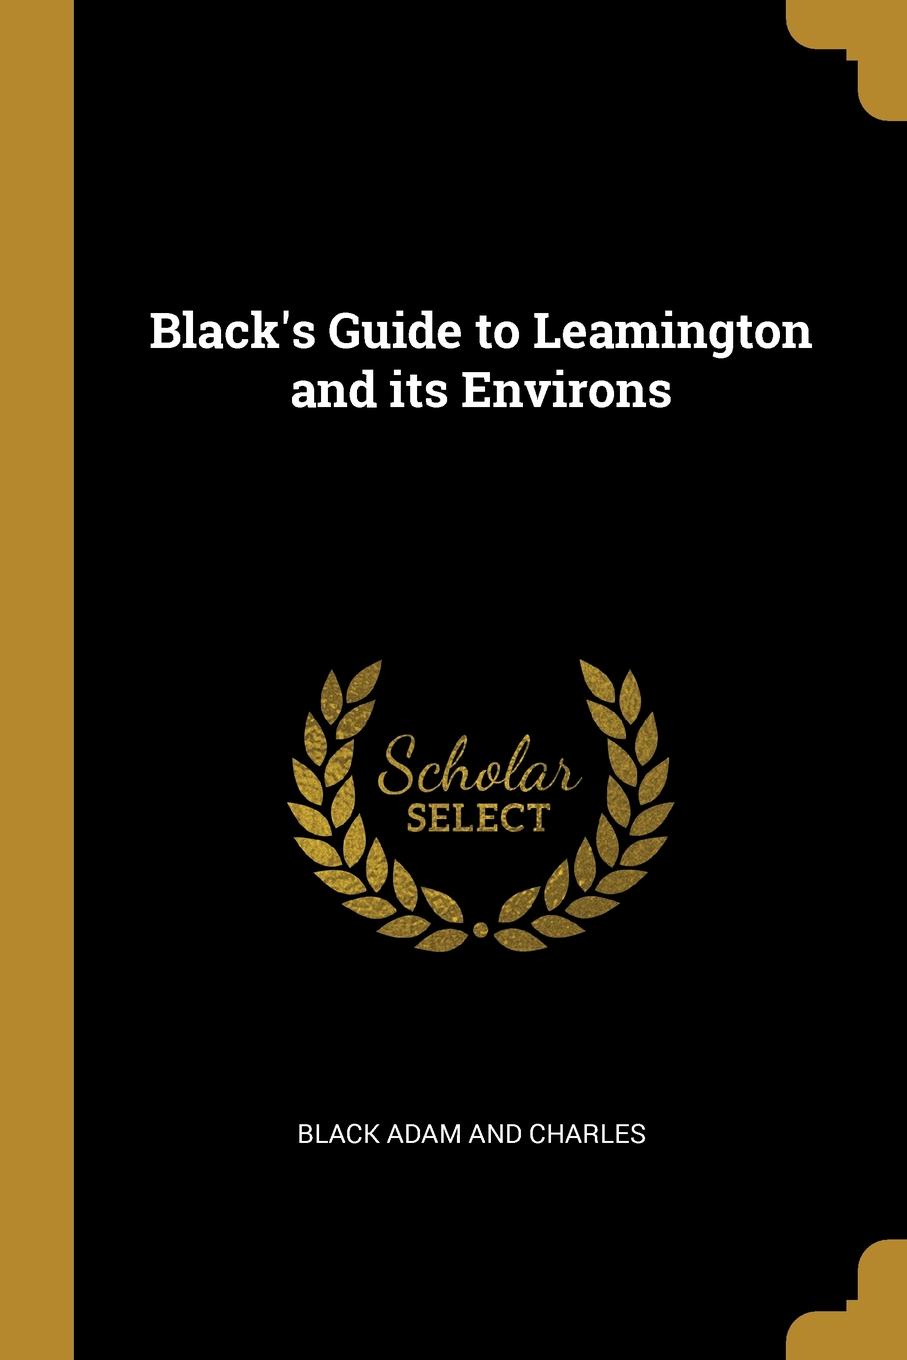 Black.s Guide to Leamington and its Environs